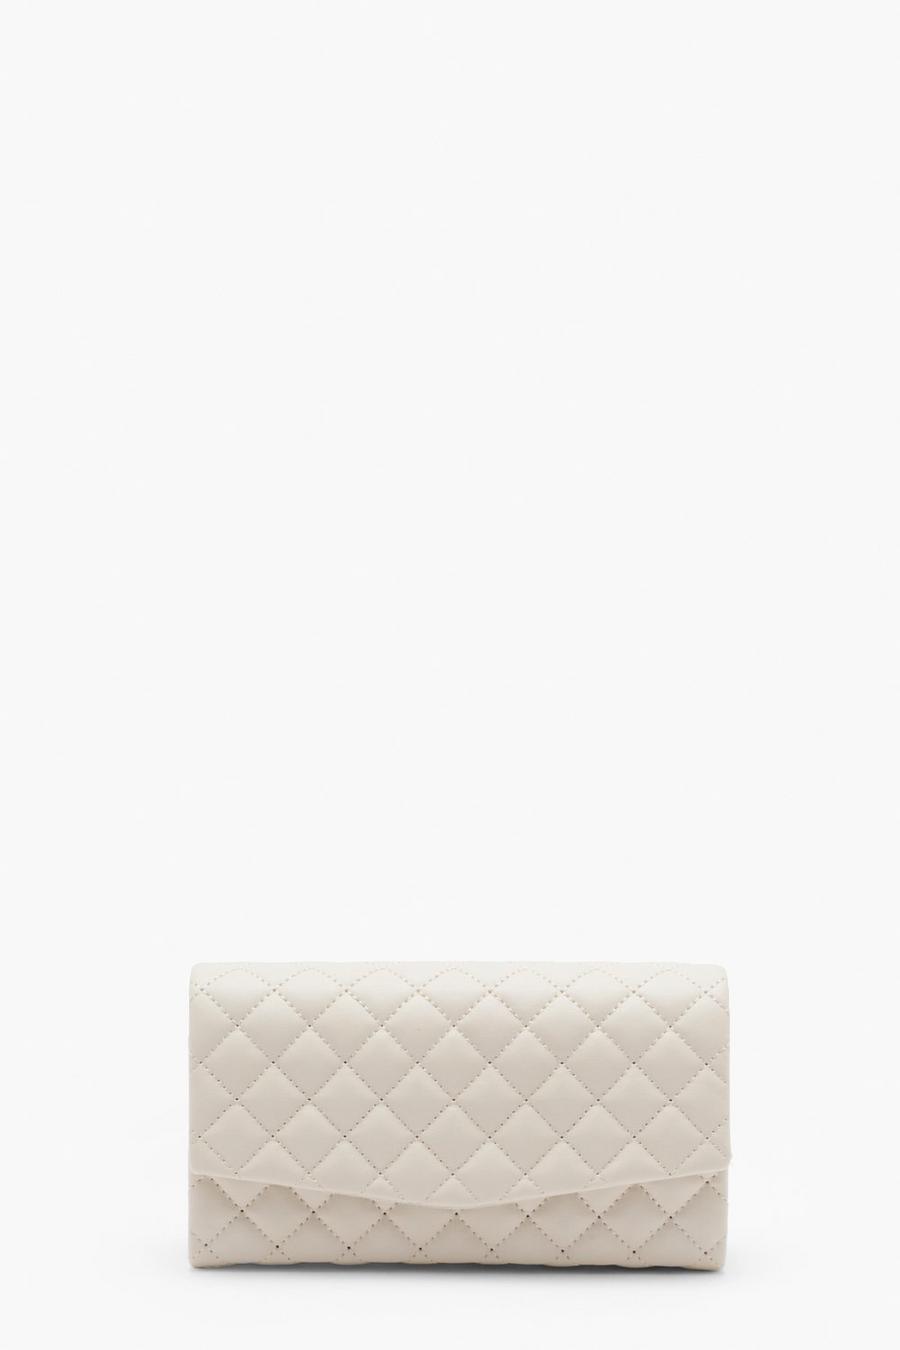 Cream white Quilted Hard Basic Clutch